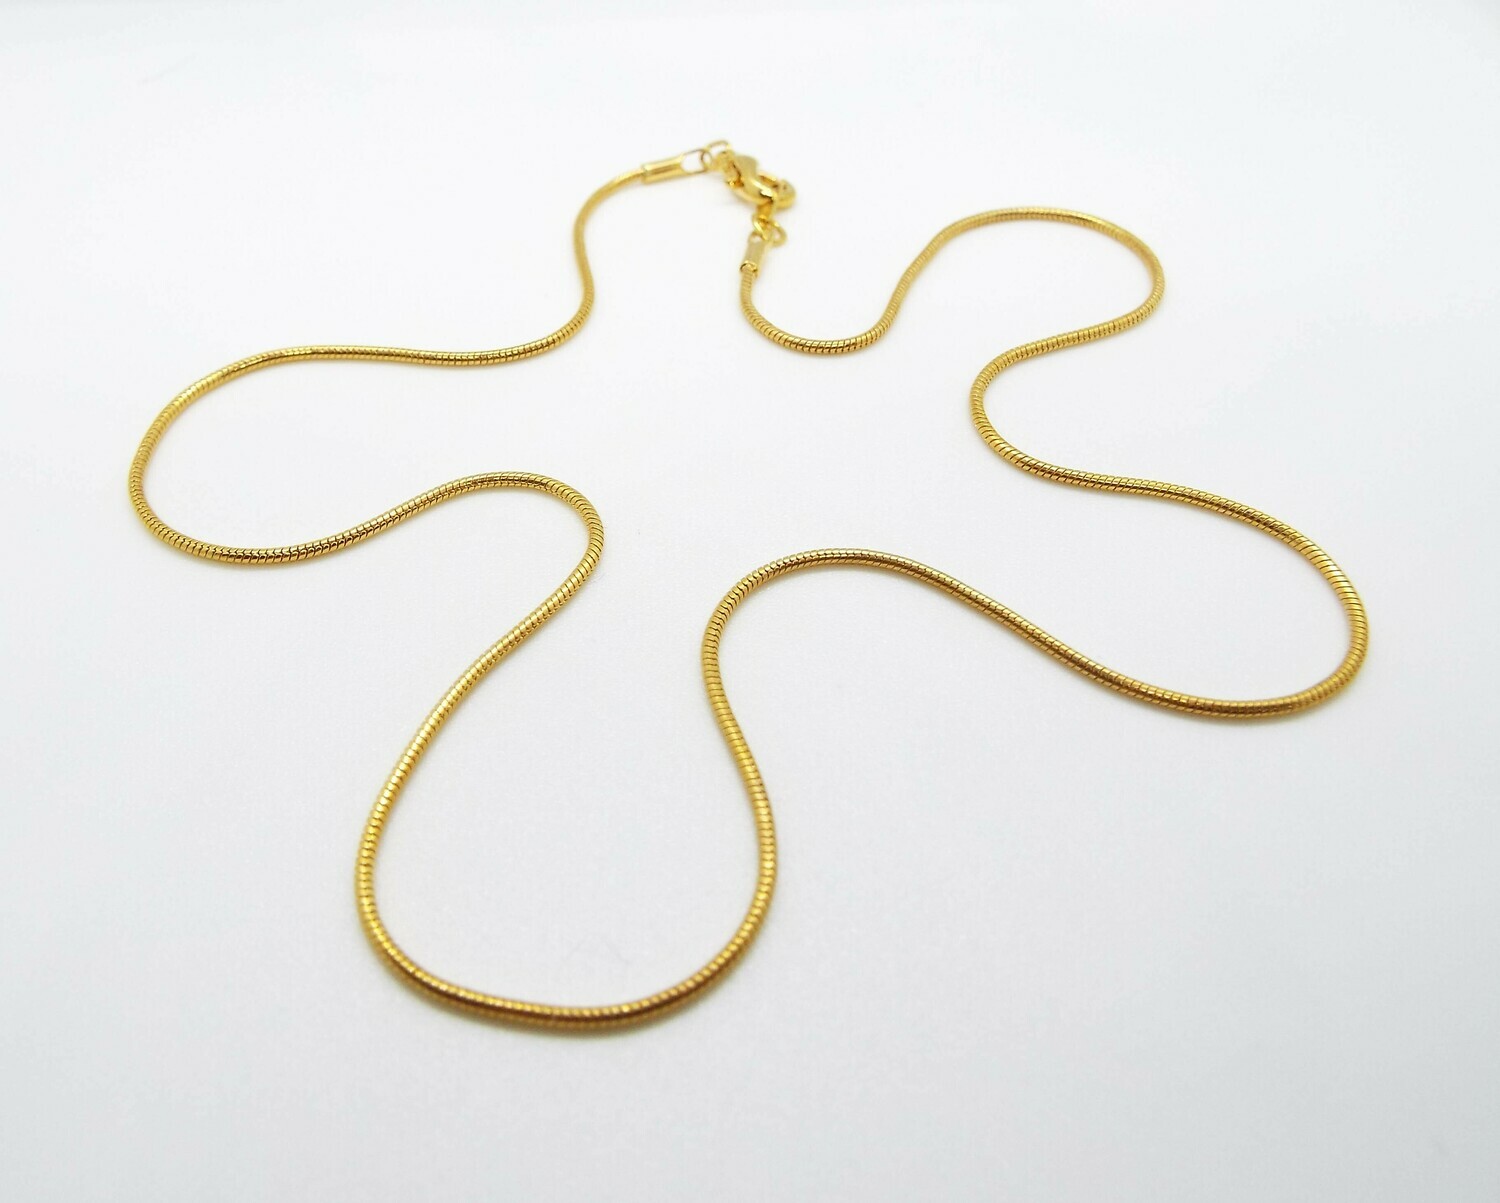 Gold-Plated Snake Chain Upgrade or Extra - ADD-ON Item Only